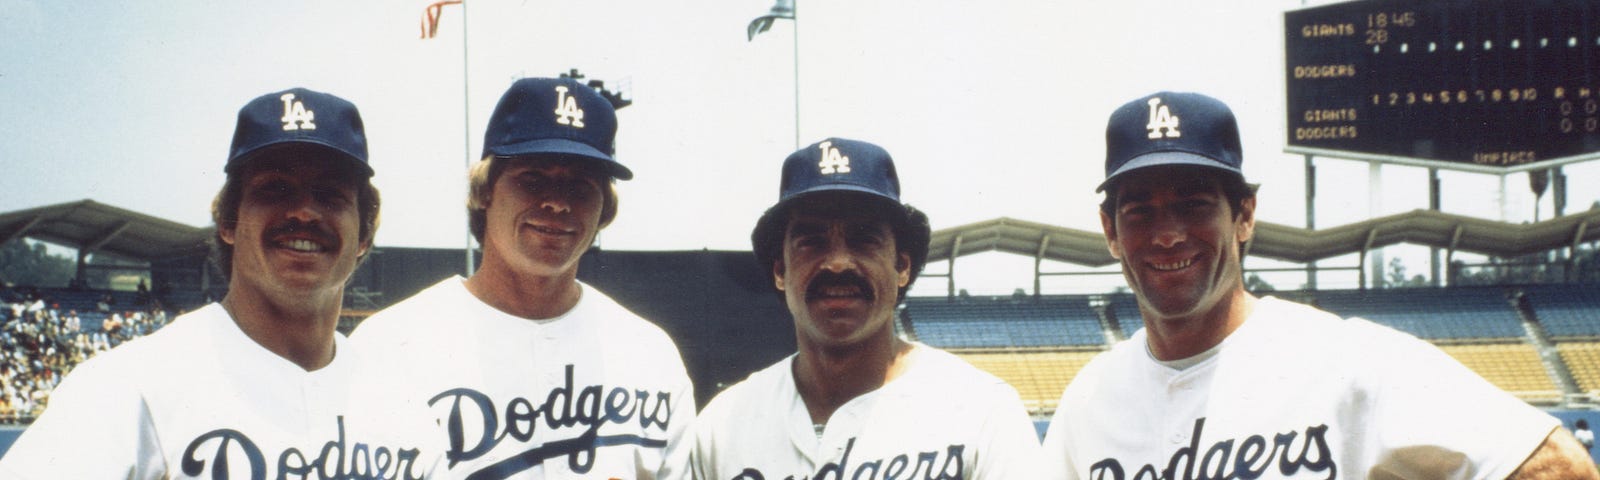 Dodger to celebrate 'Legendary Infield' on its 50th anniversary, by Cary  Osborne